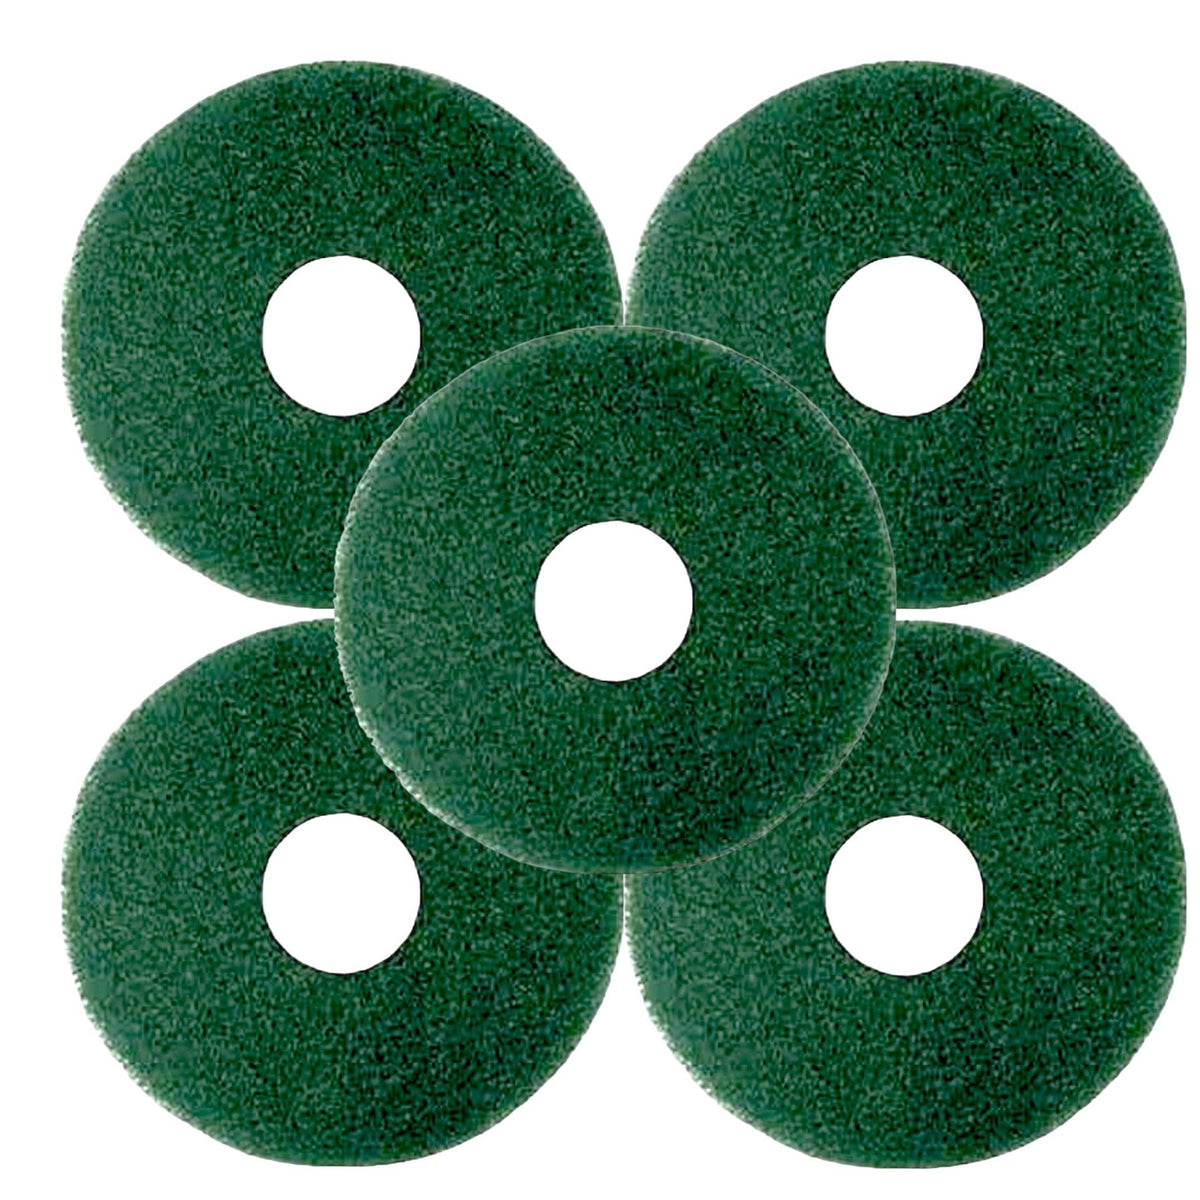 Green Floor Pads Pack of 5 17 inch Pads For Machine Buffing